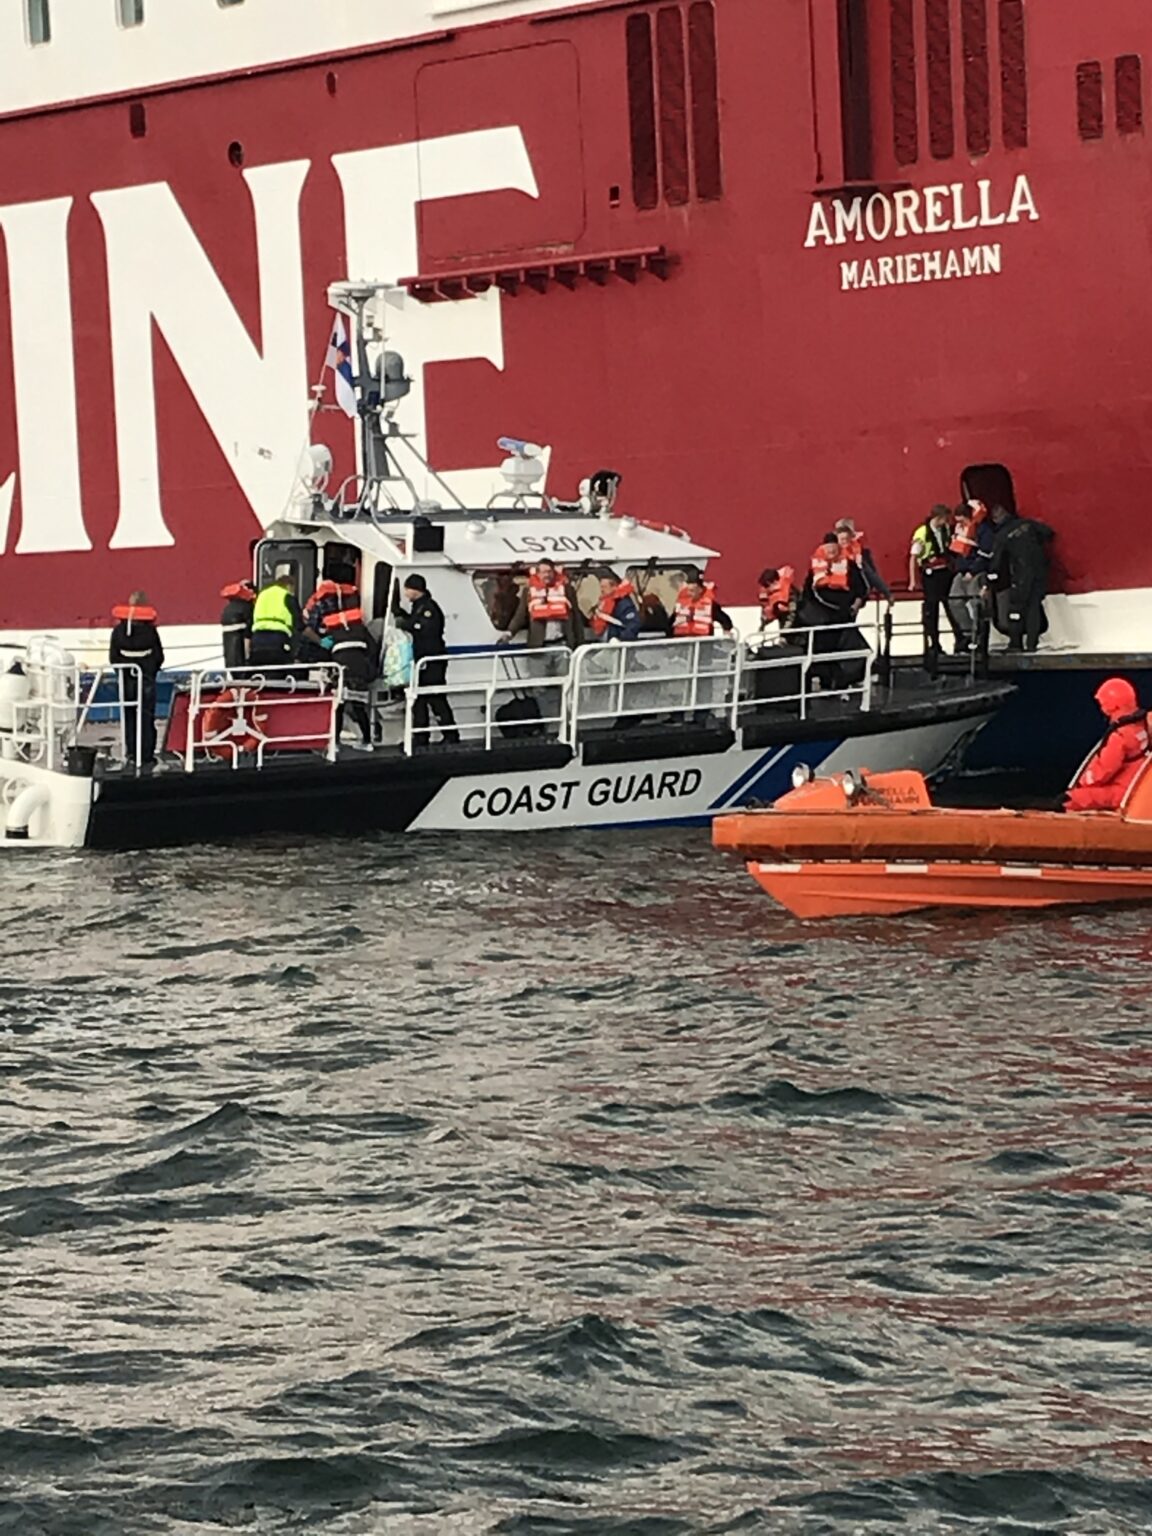 Viking Line's ferry run aground in the Åland Islands